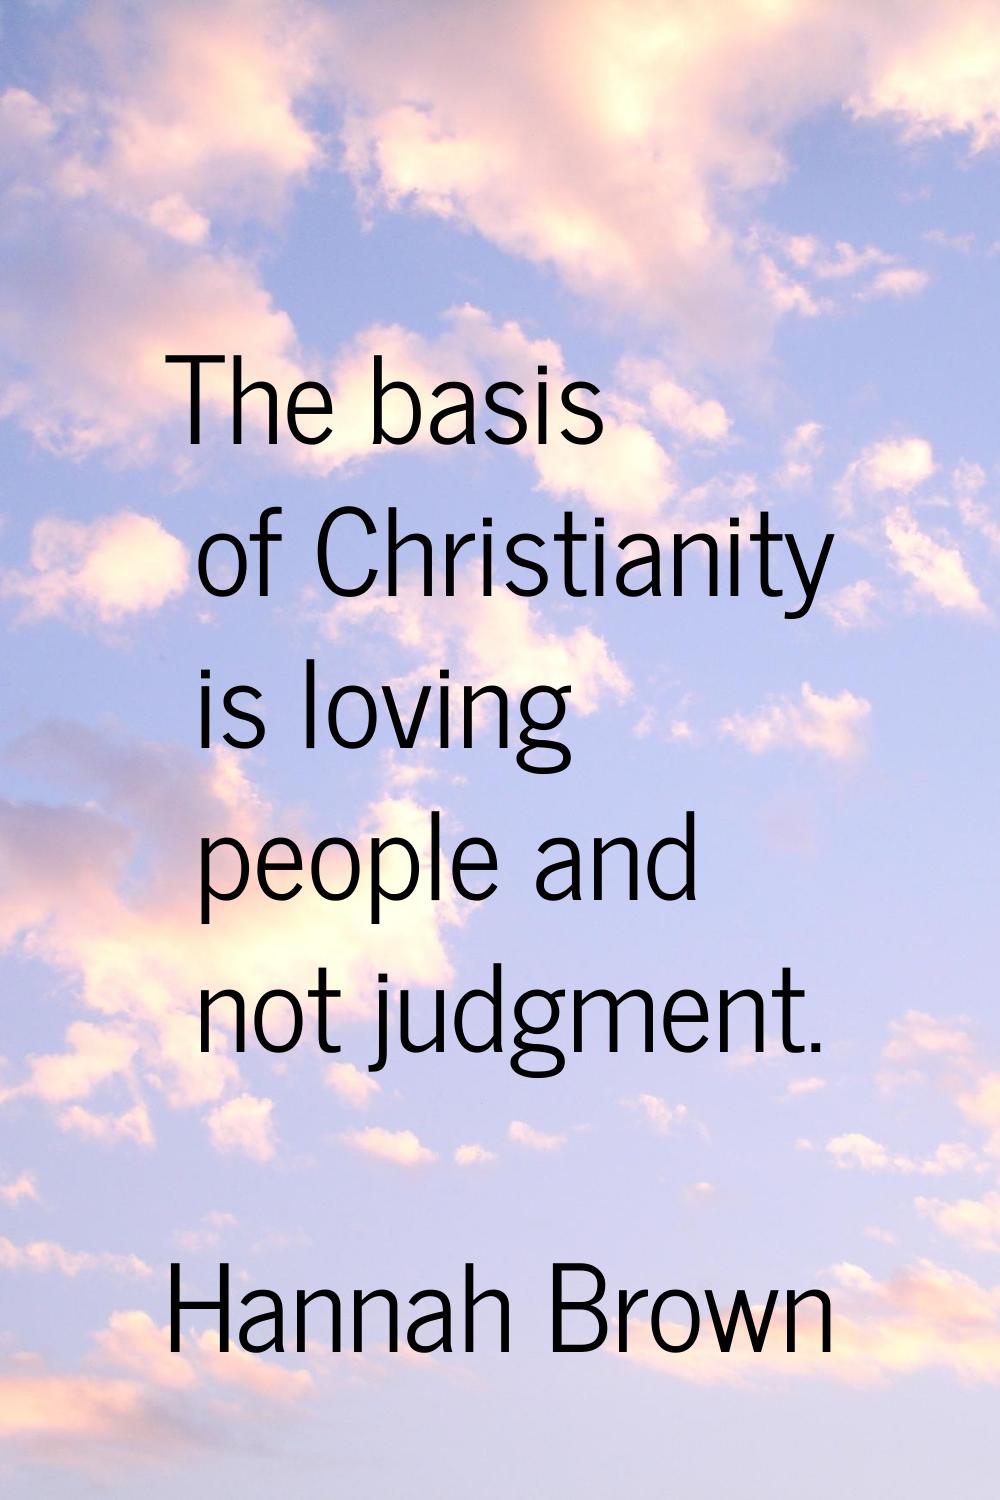 The basis of Christianity is loving people and not judgment.